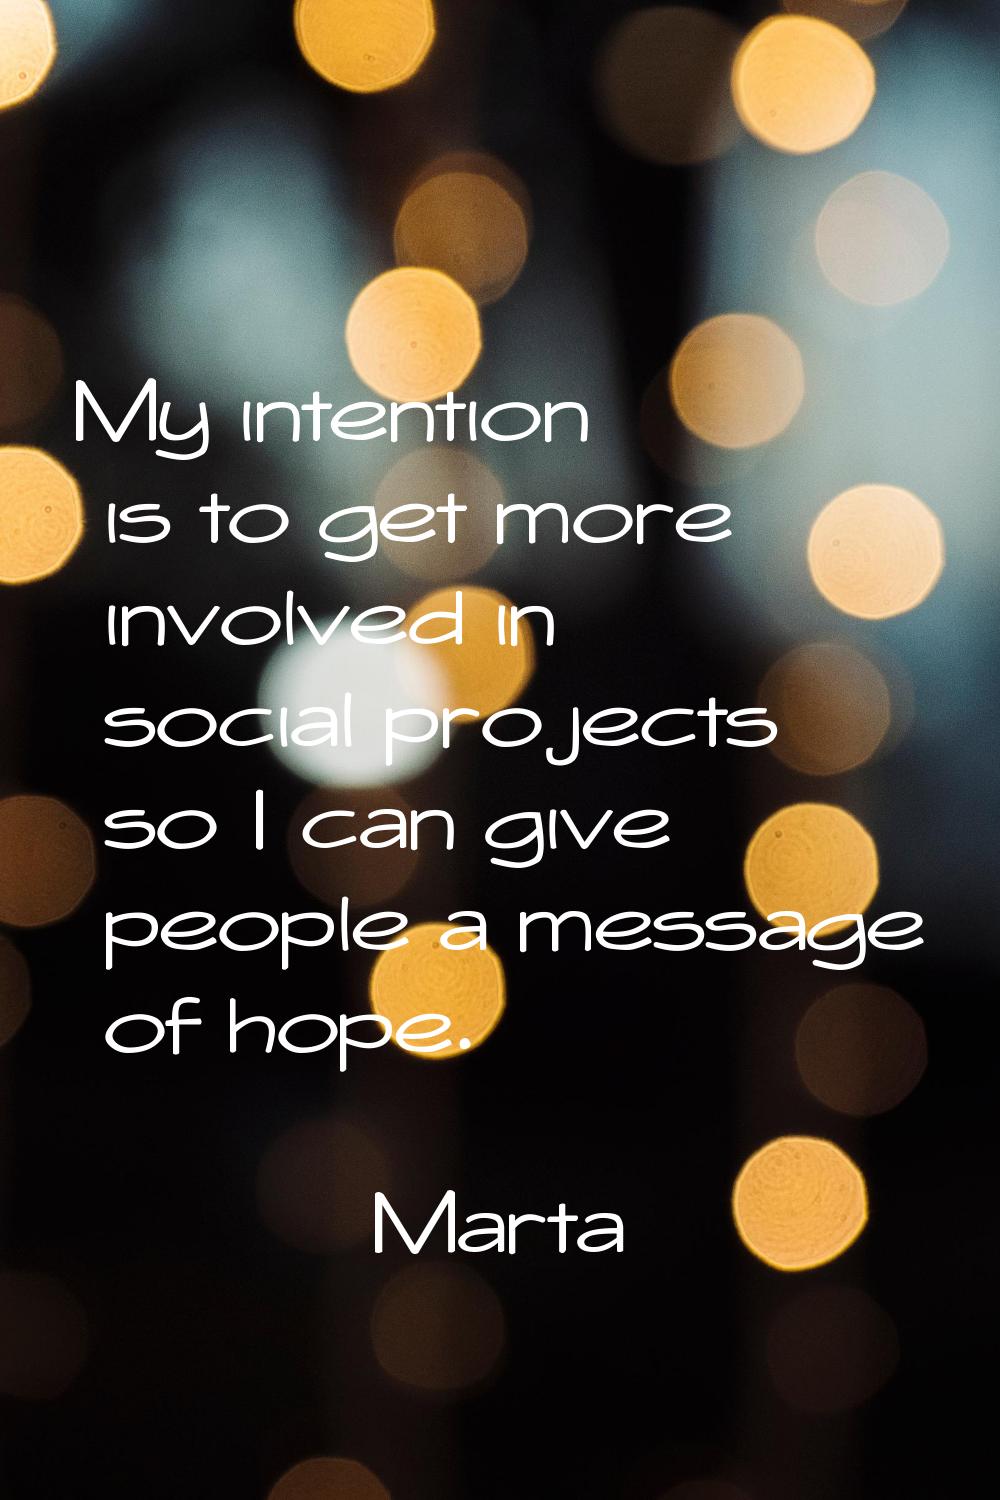 My intention is to get more involved in social projects so I can give people a message of hope.